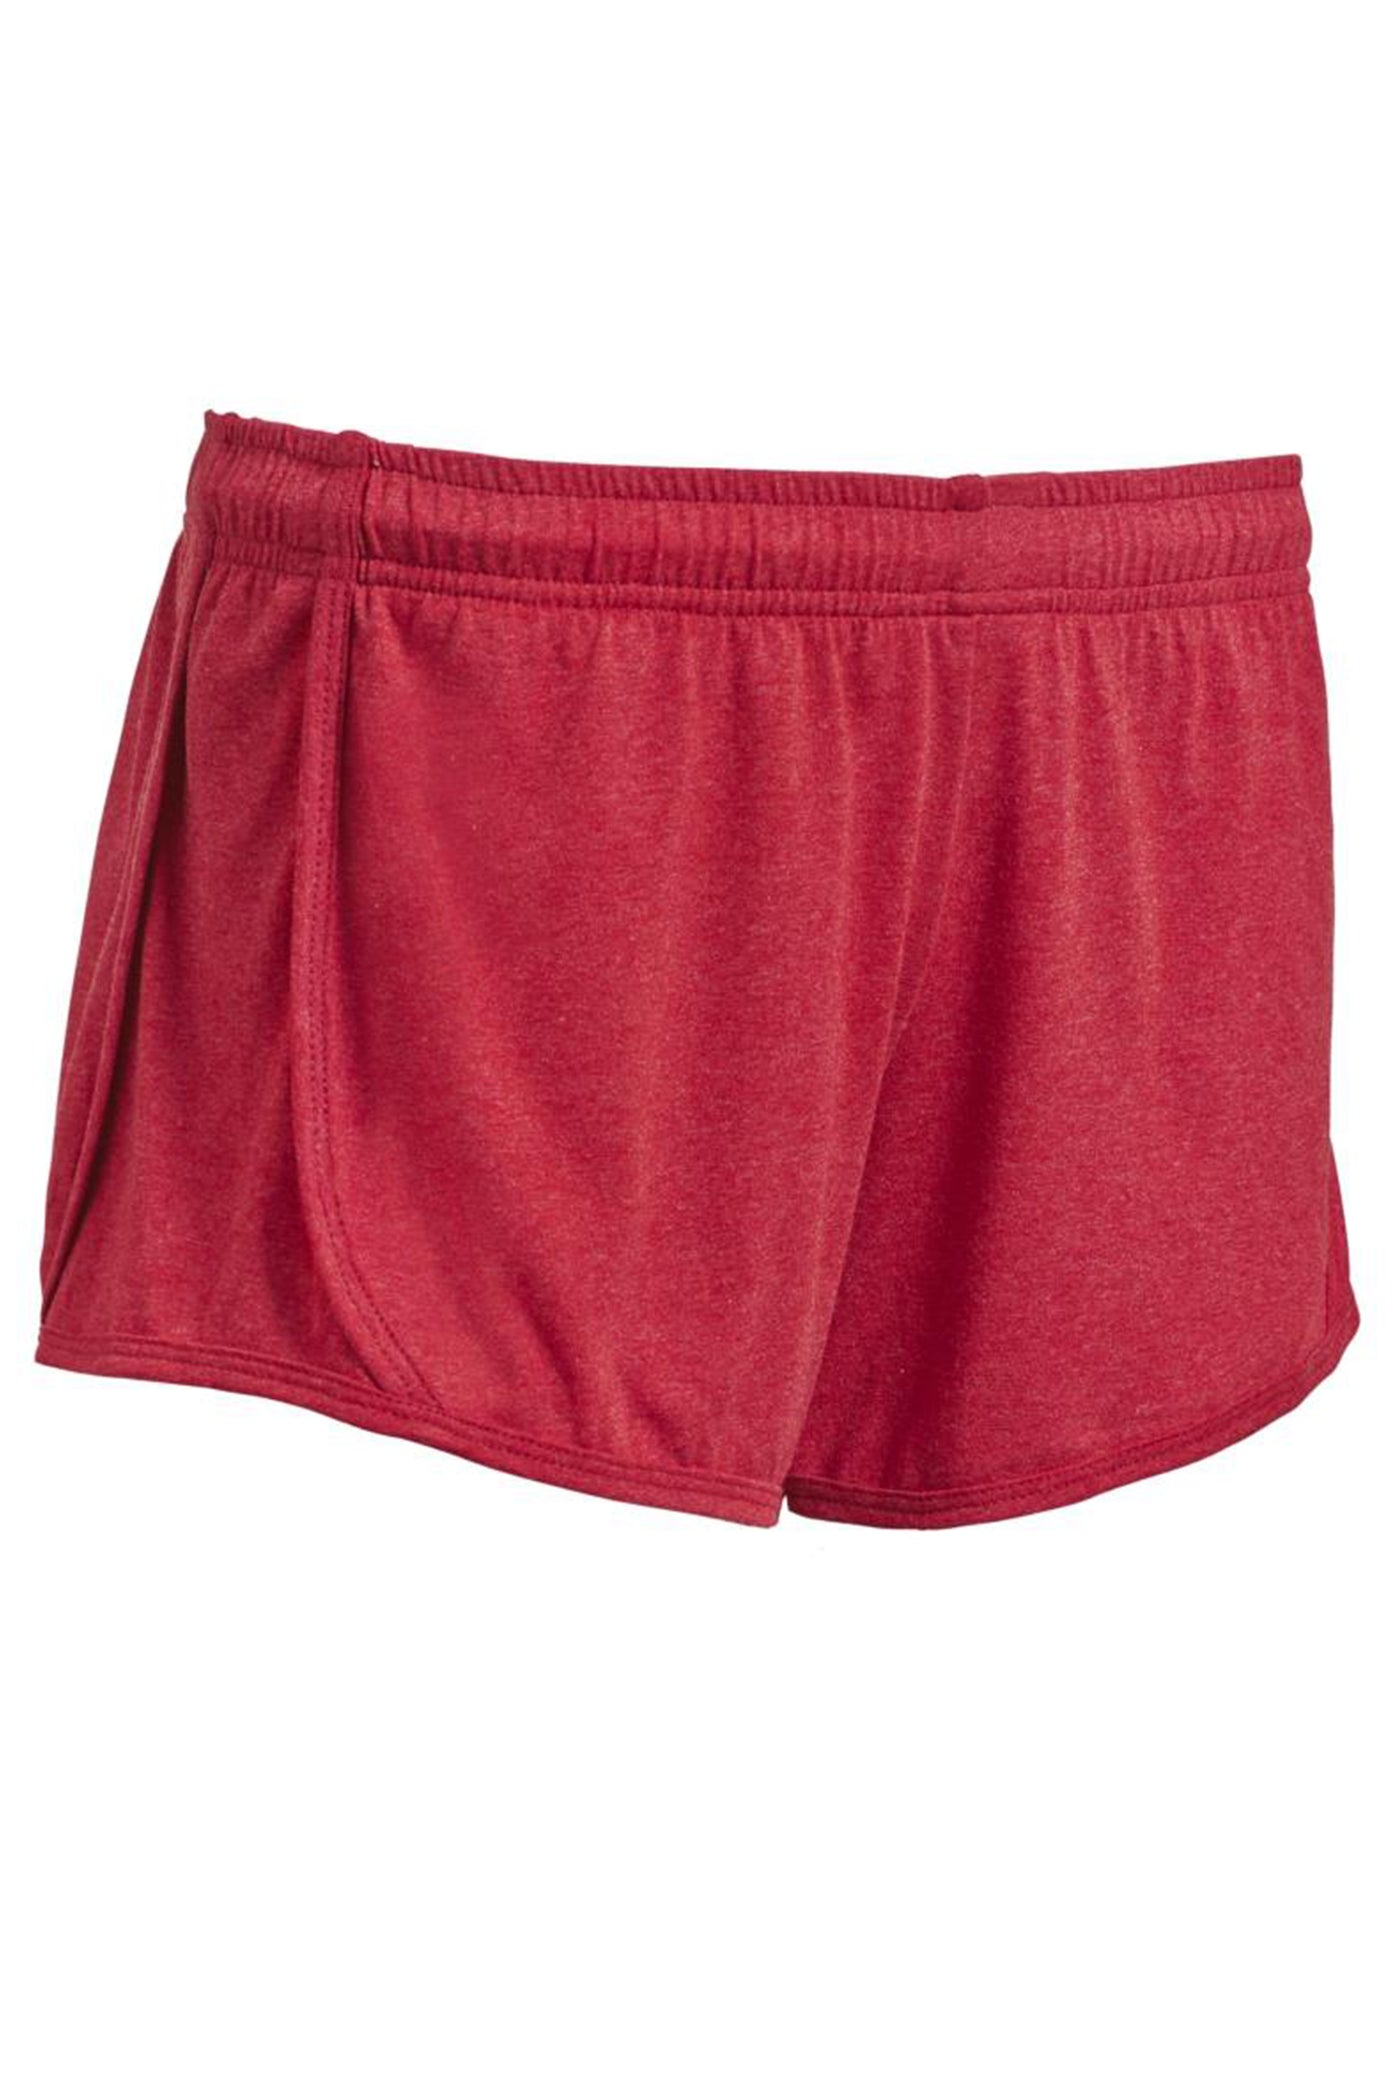 Expert Brand Retail Made in USA sportswear activewear women's shorts heather red#color_dark-heather-red